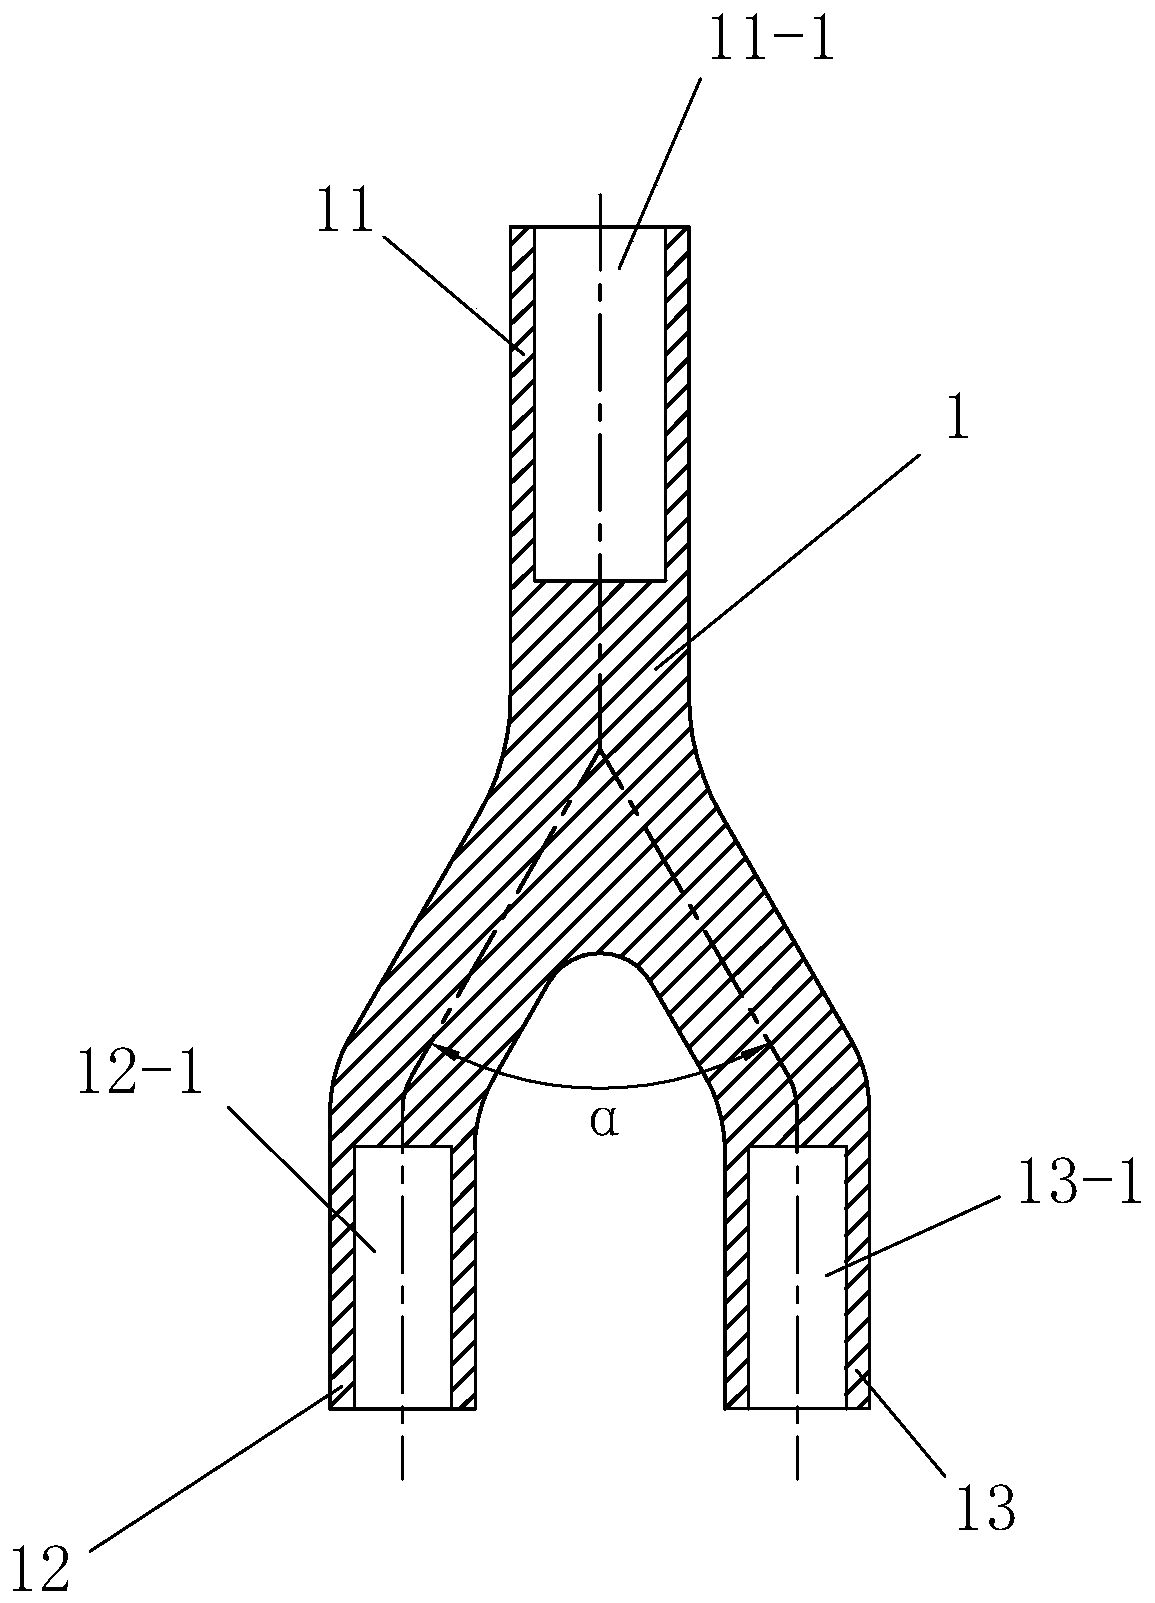 Pre-branched cable and manufacturing method thereof